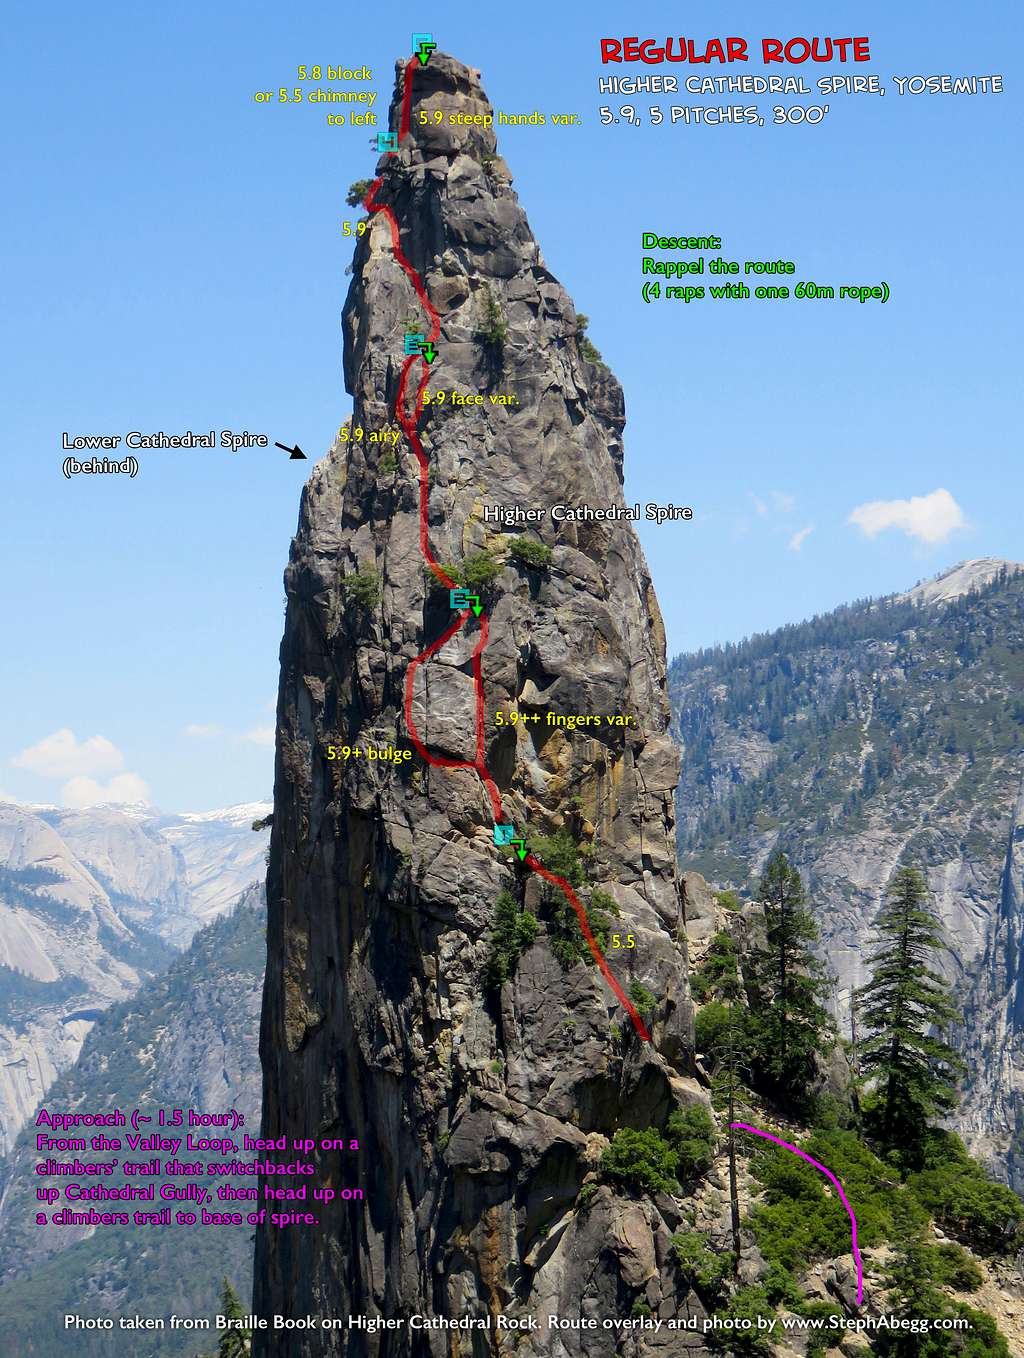 Route Overlay for Higher Cathedral Spire Regular Route